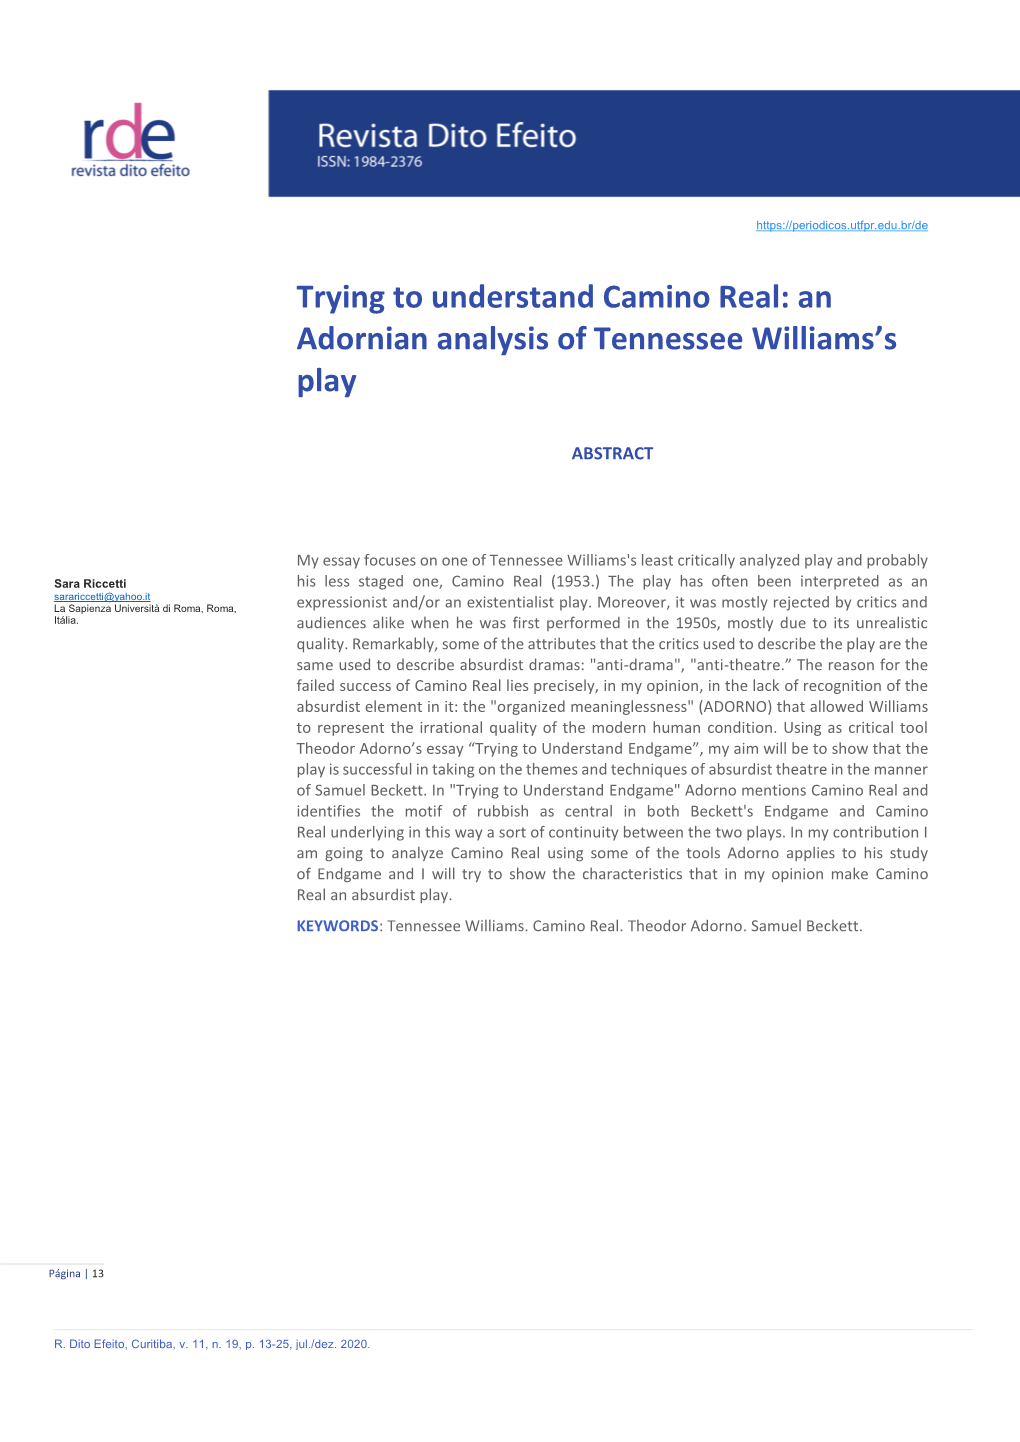 Trying to Understand Camino Real: an Adornian Analysis of Tennessee Williams's Play